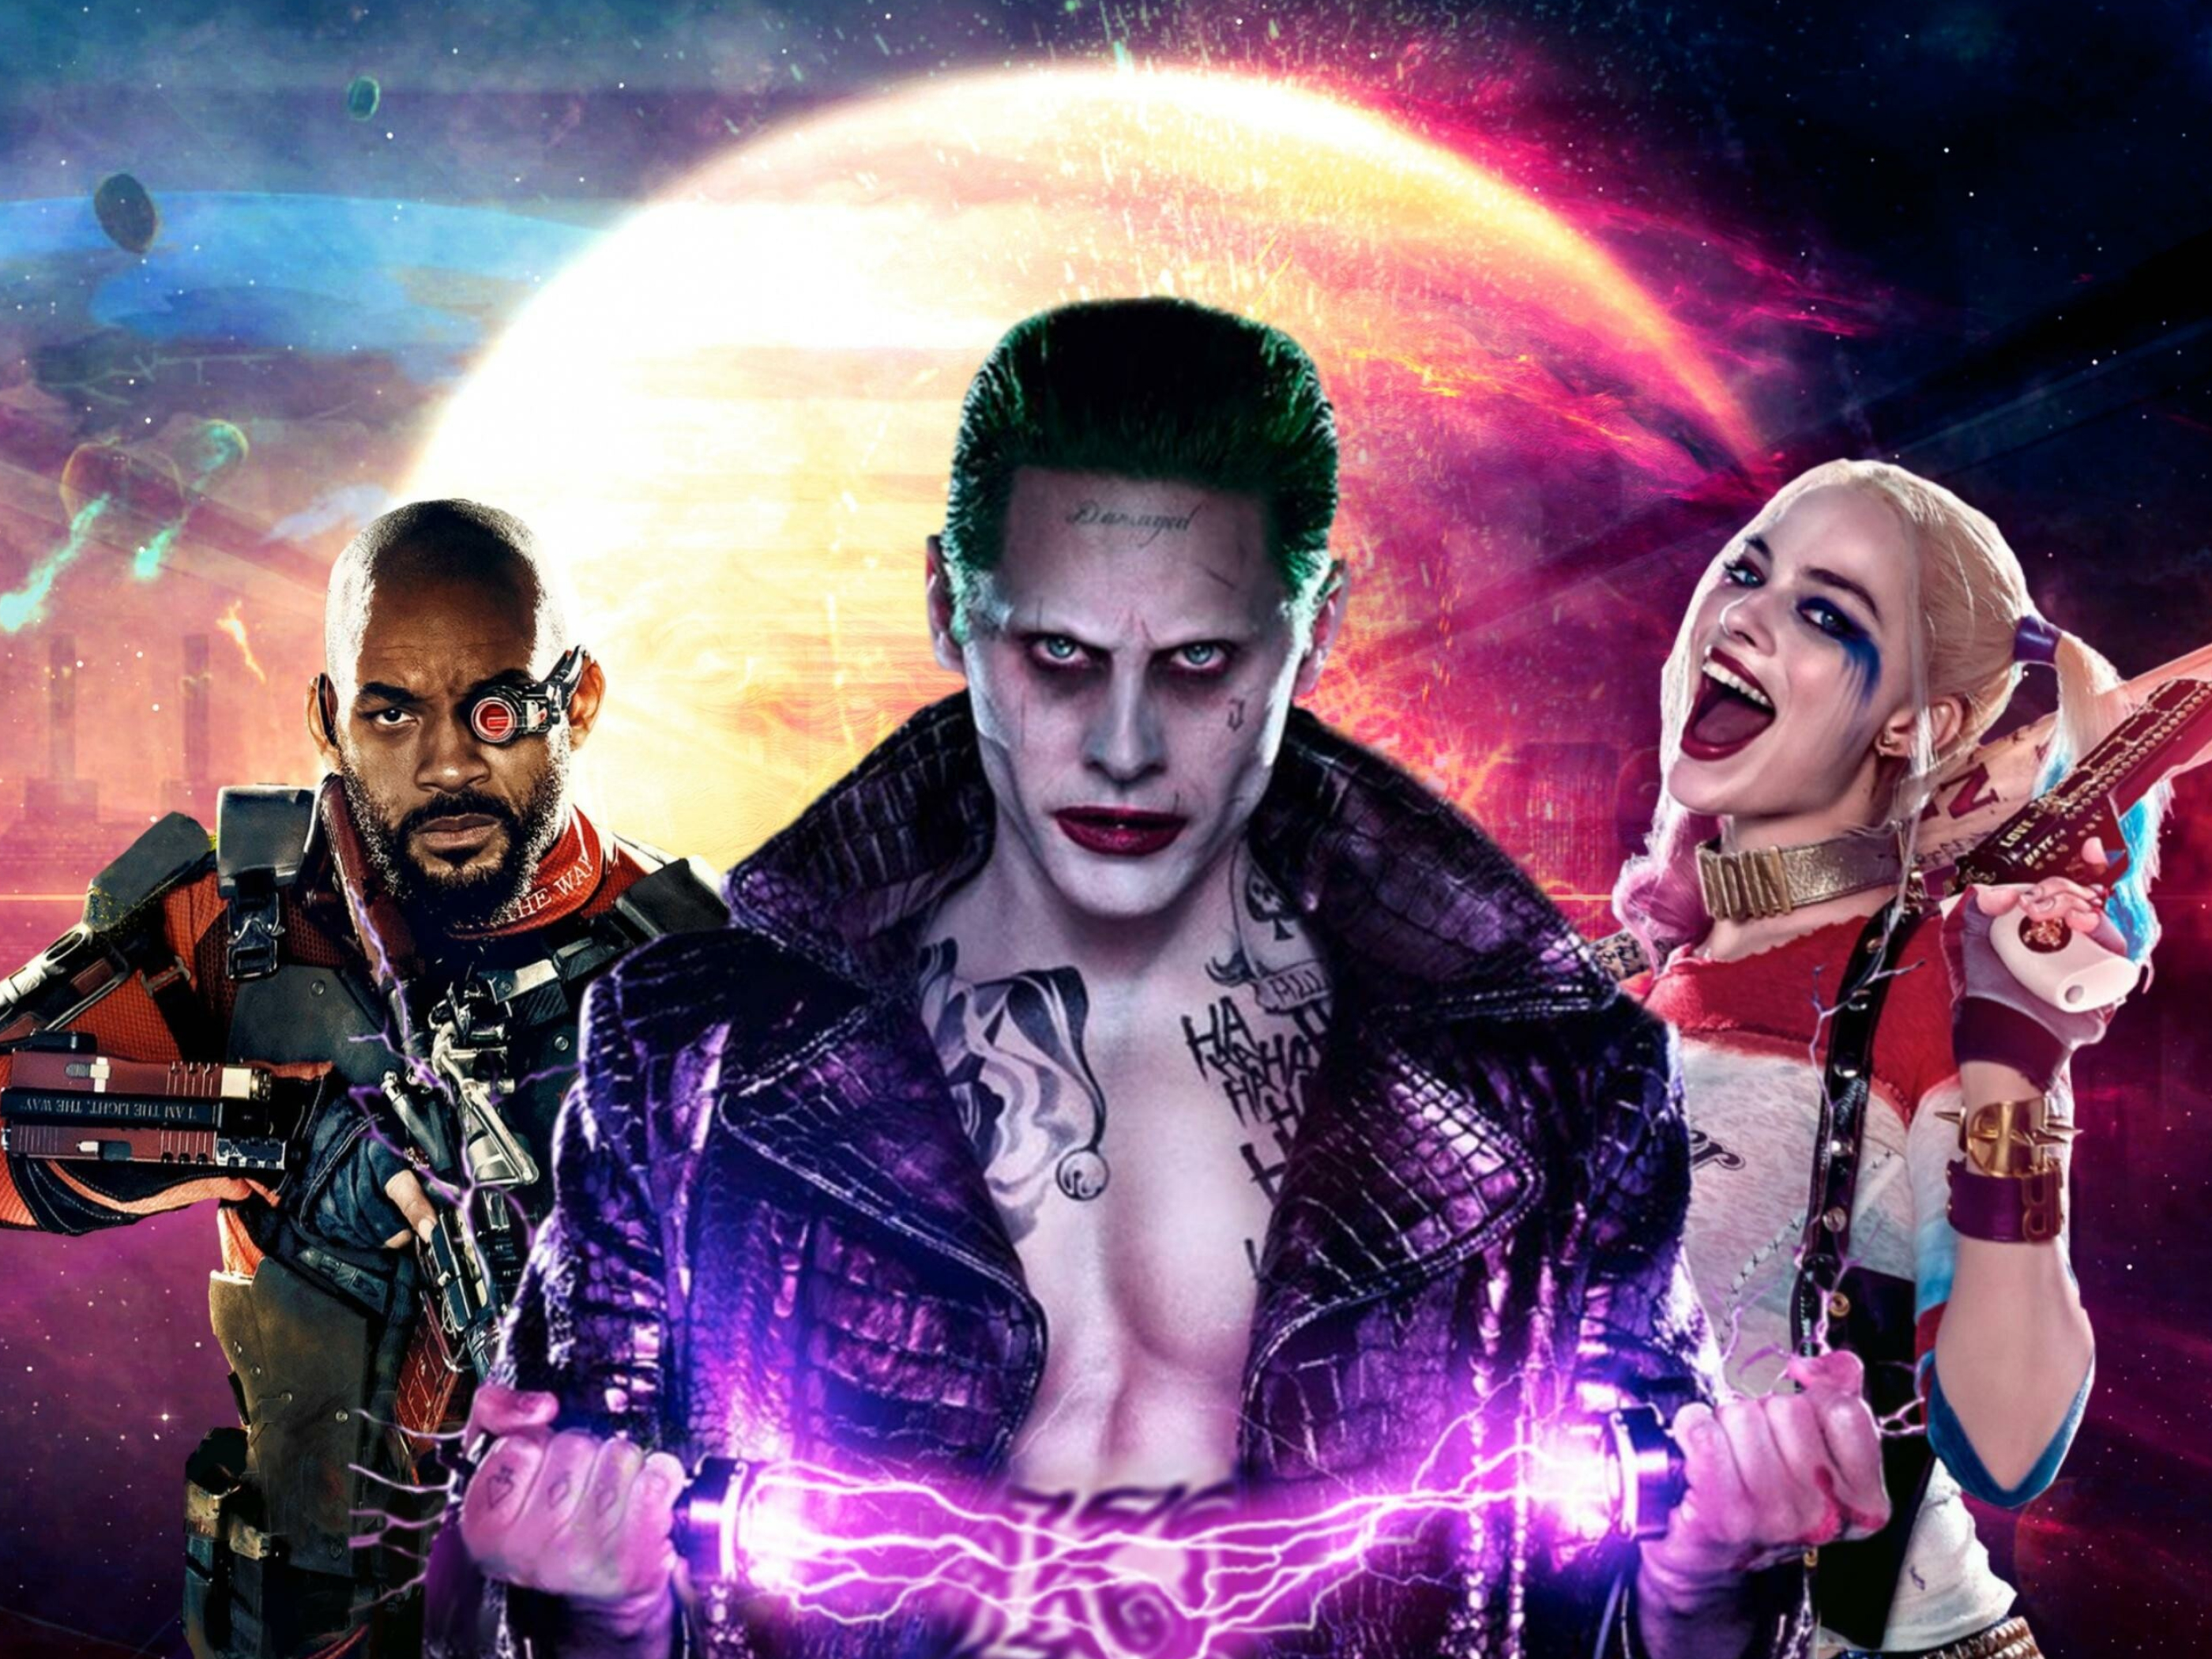 Suicide Squad: The film was written and directed by David Ayer and stars an ensemble cast led by Will Smith, Jared Leto, Margot Robbie, Joel Kinnaman, Viola Davis, Jai Courtney, Jay Hernandez, Adewale Akinnuoye-Agbaje, Ike Barinholtz, Scott Eastwood, and Cara Delevingne. 2800x2100 HD Wallpaper.